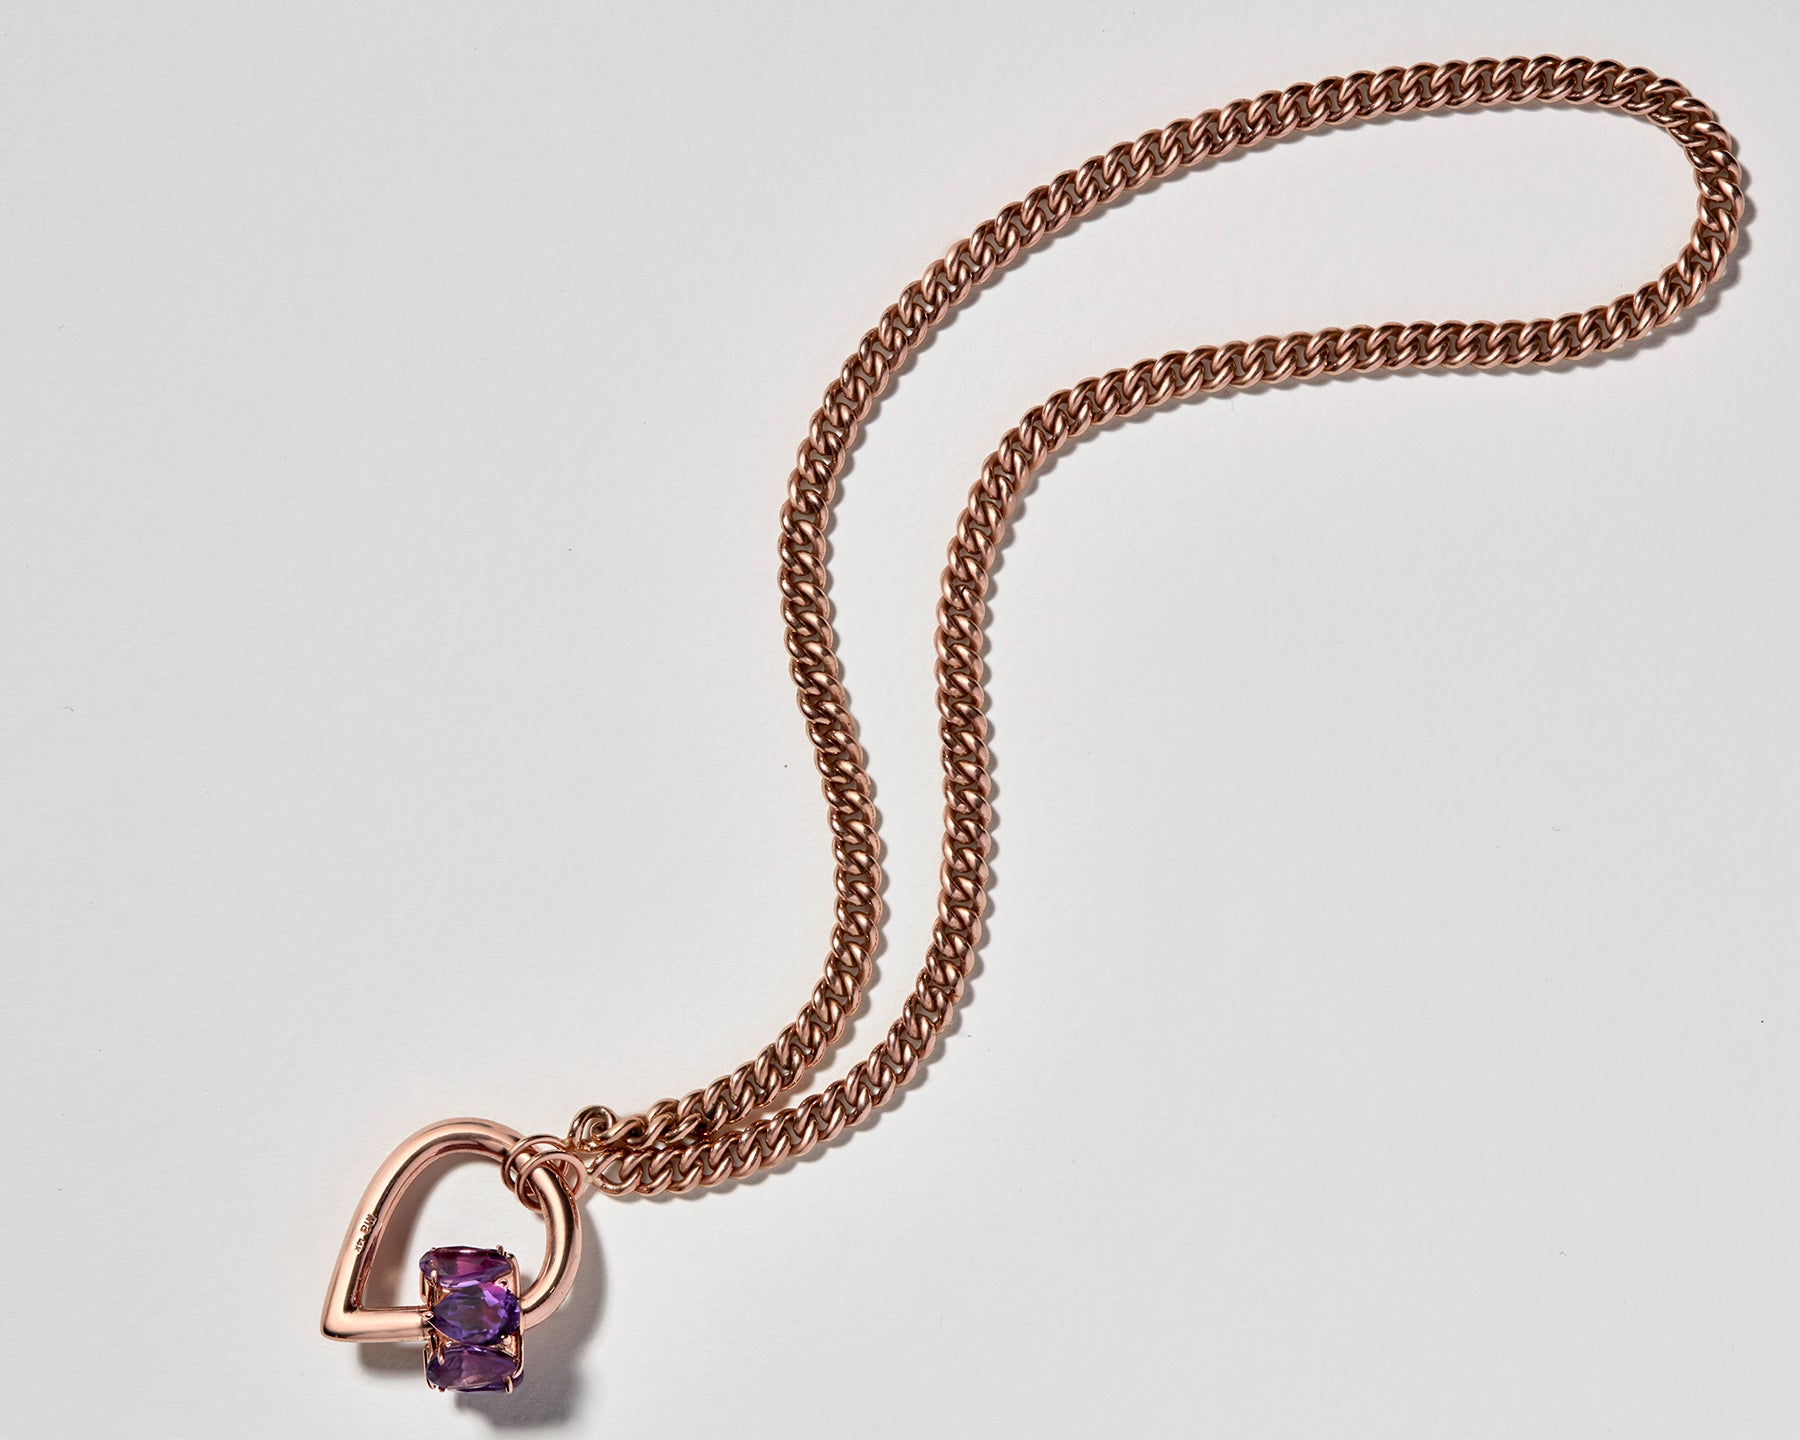 Rose gold drop lock charm with purple gemstones attached to rose gold chain necklace